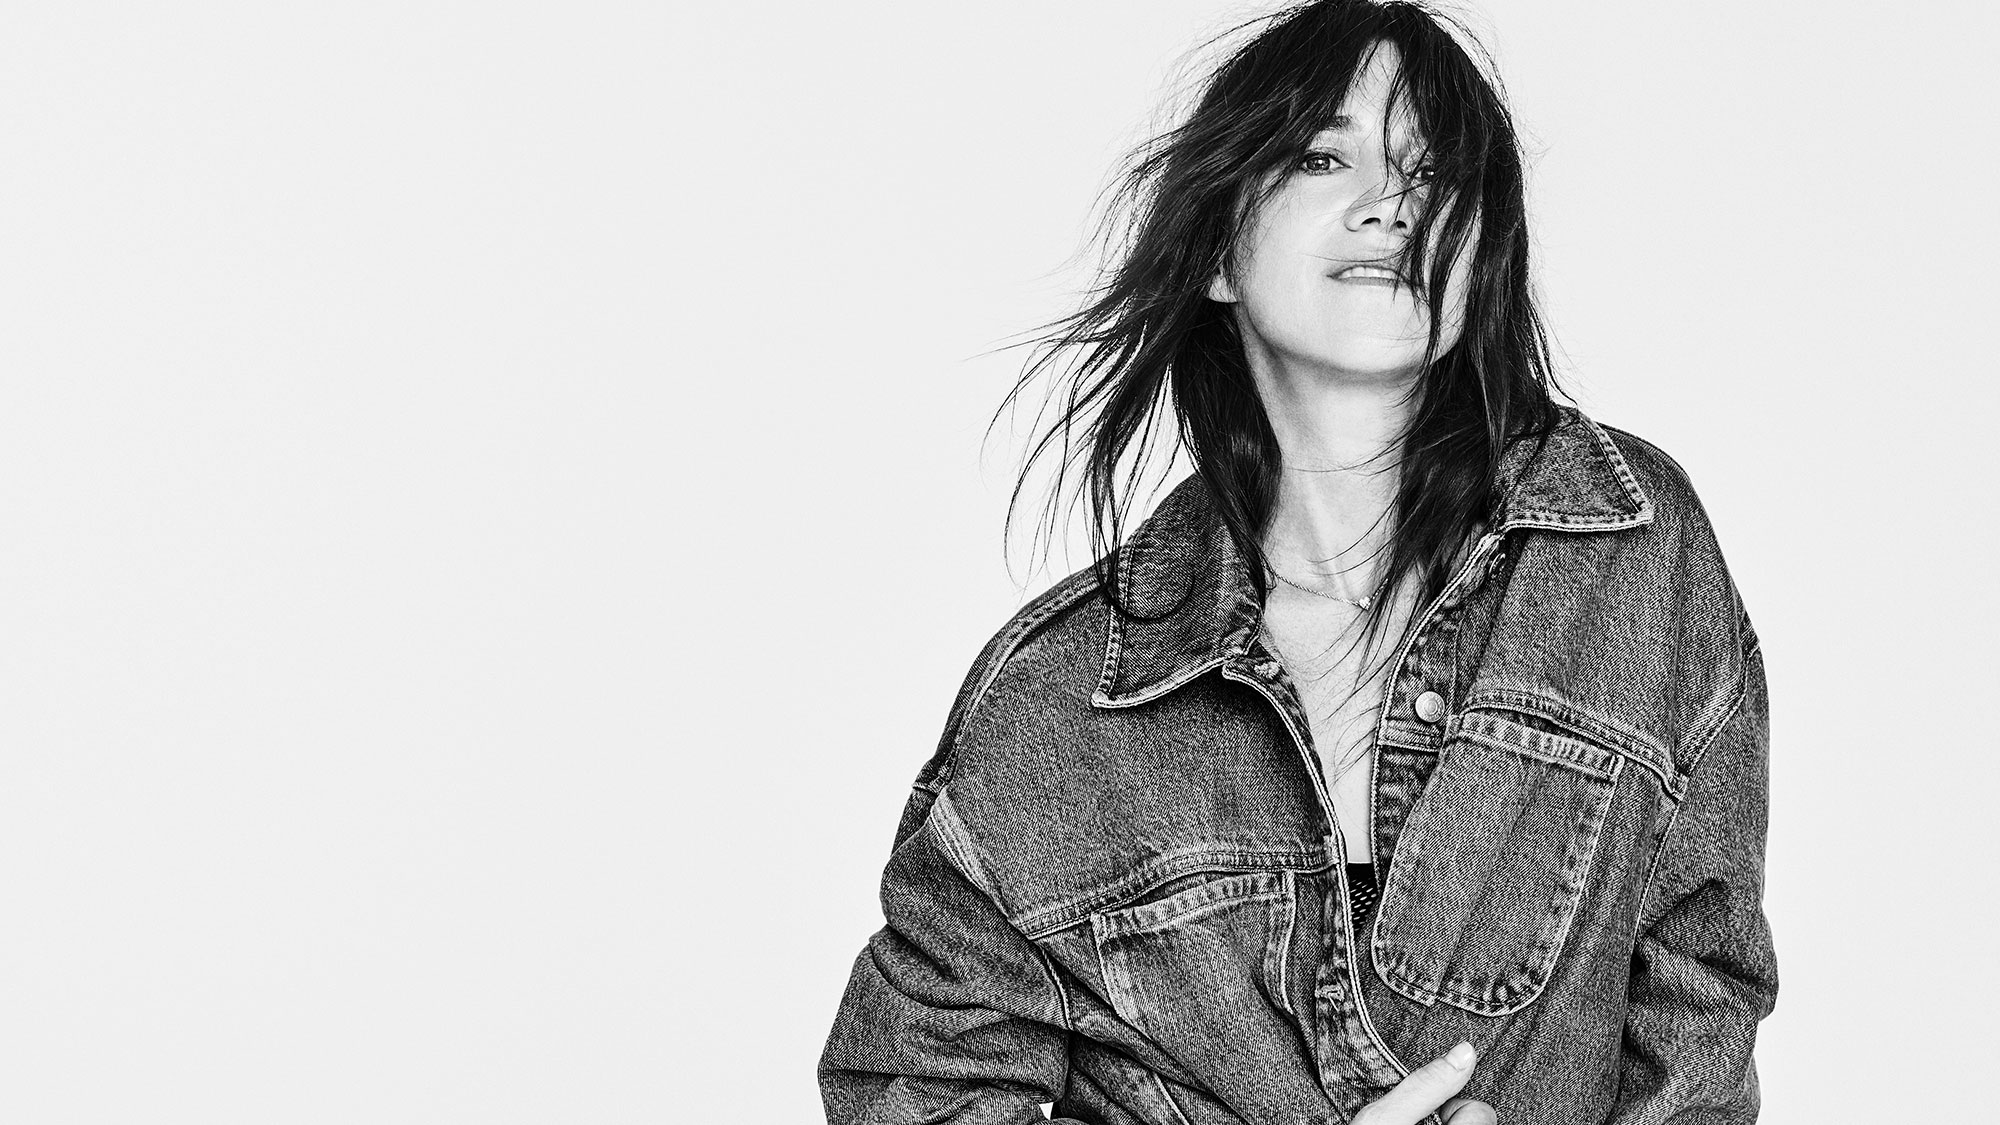 Zara has revealed its first ever celebrity collaboration